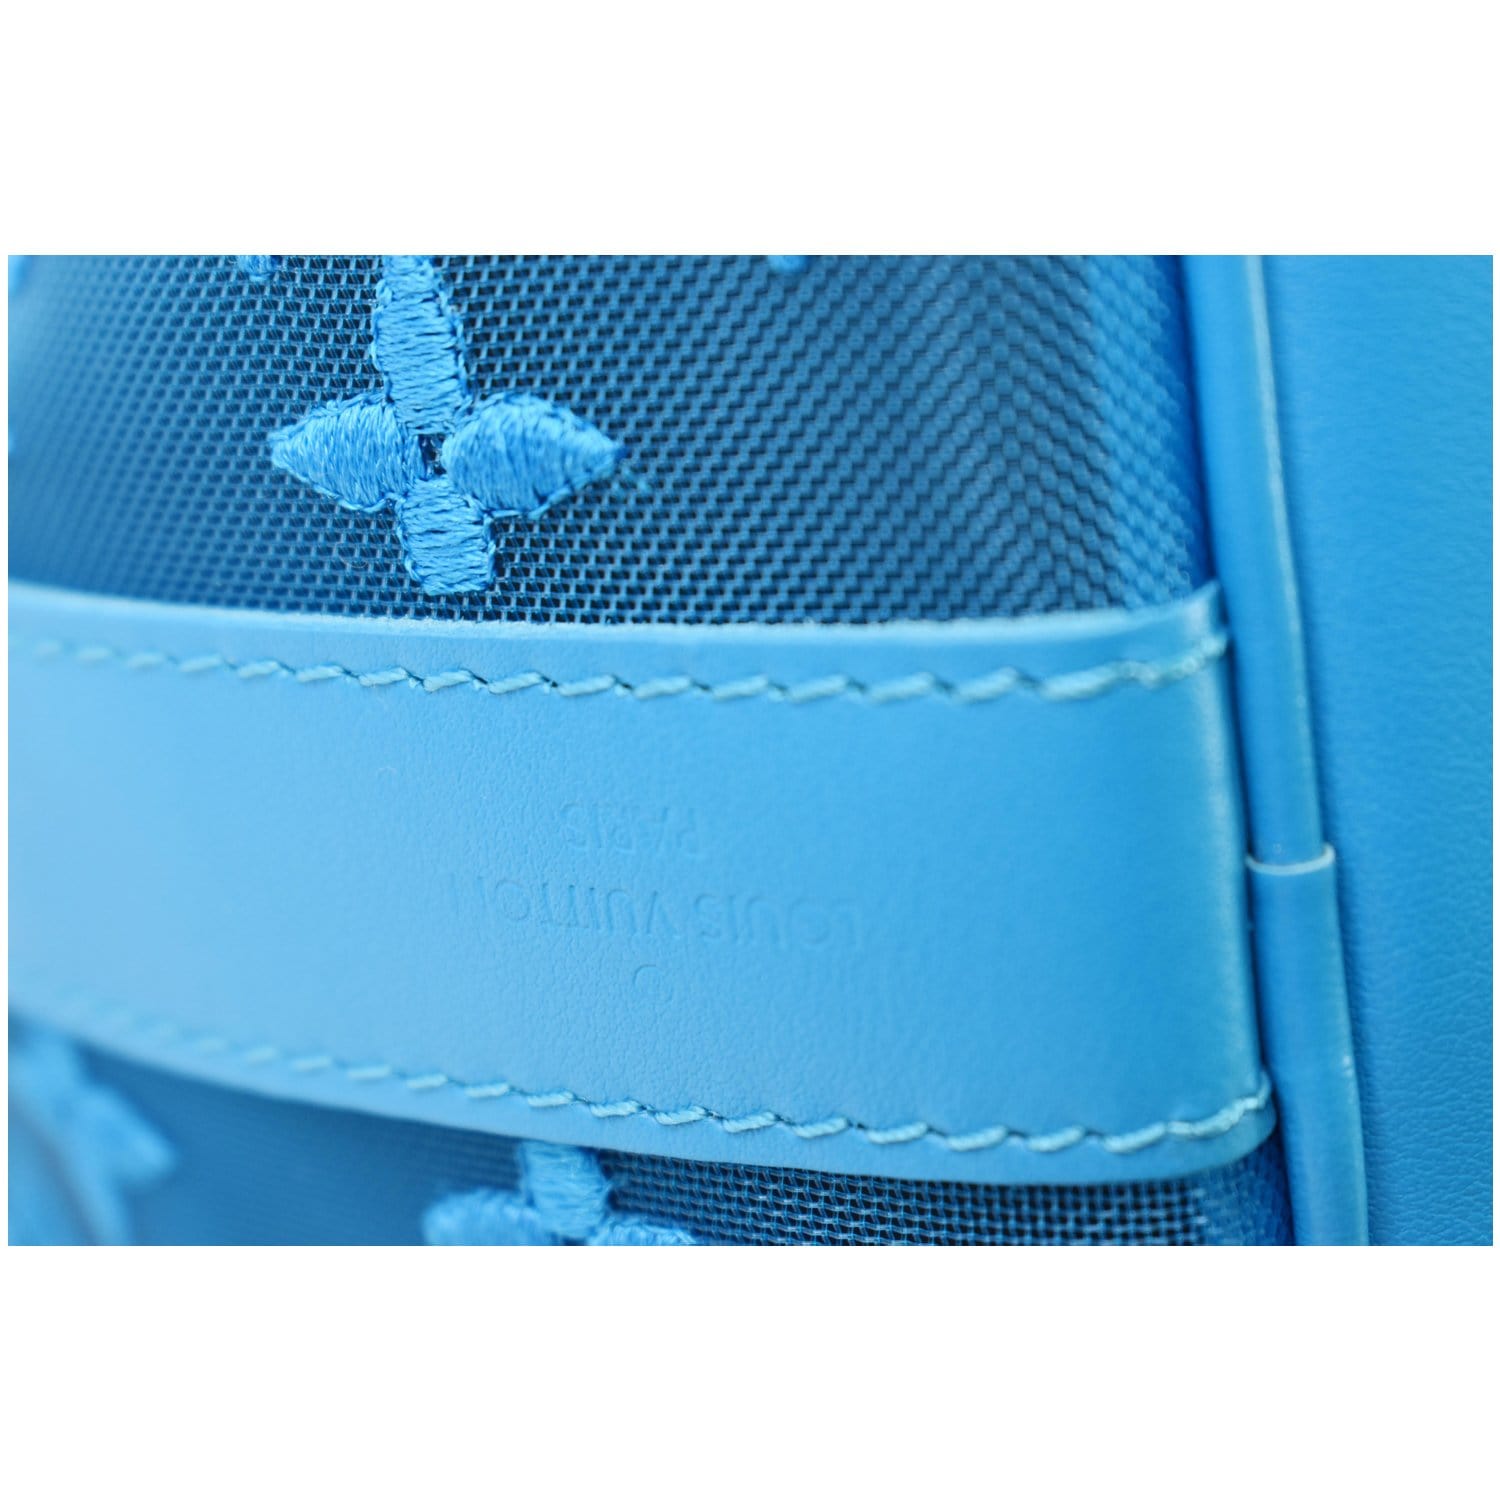 LOUIS VUITTON Monogram See Through Keepall Triangle Bandouliere 50 Turquoise  1257620